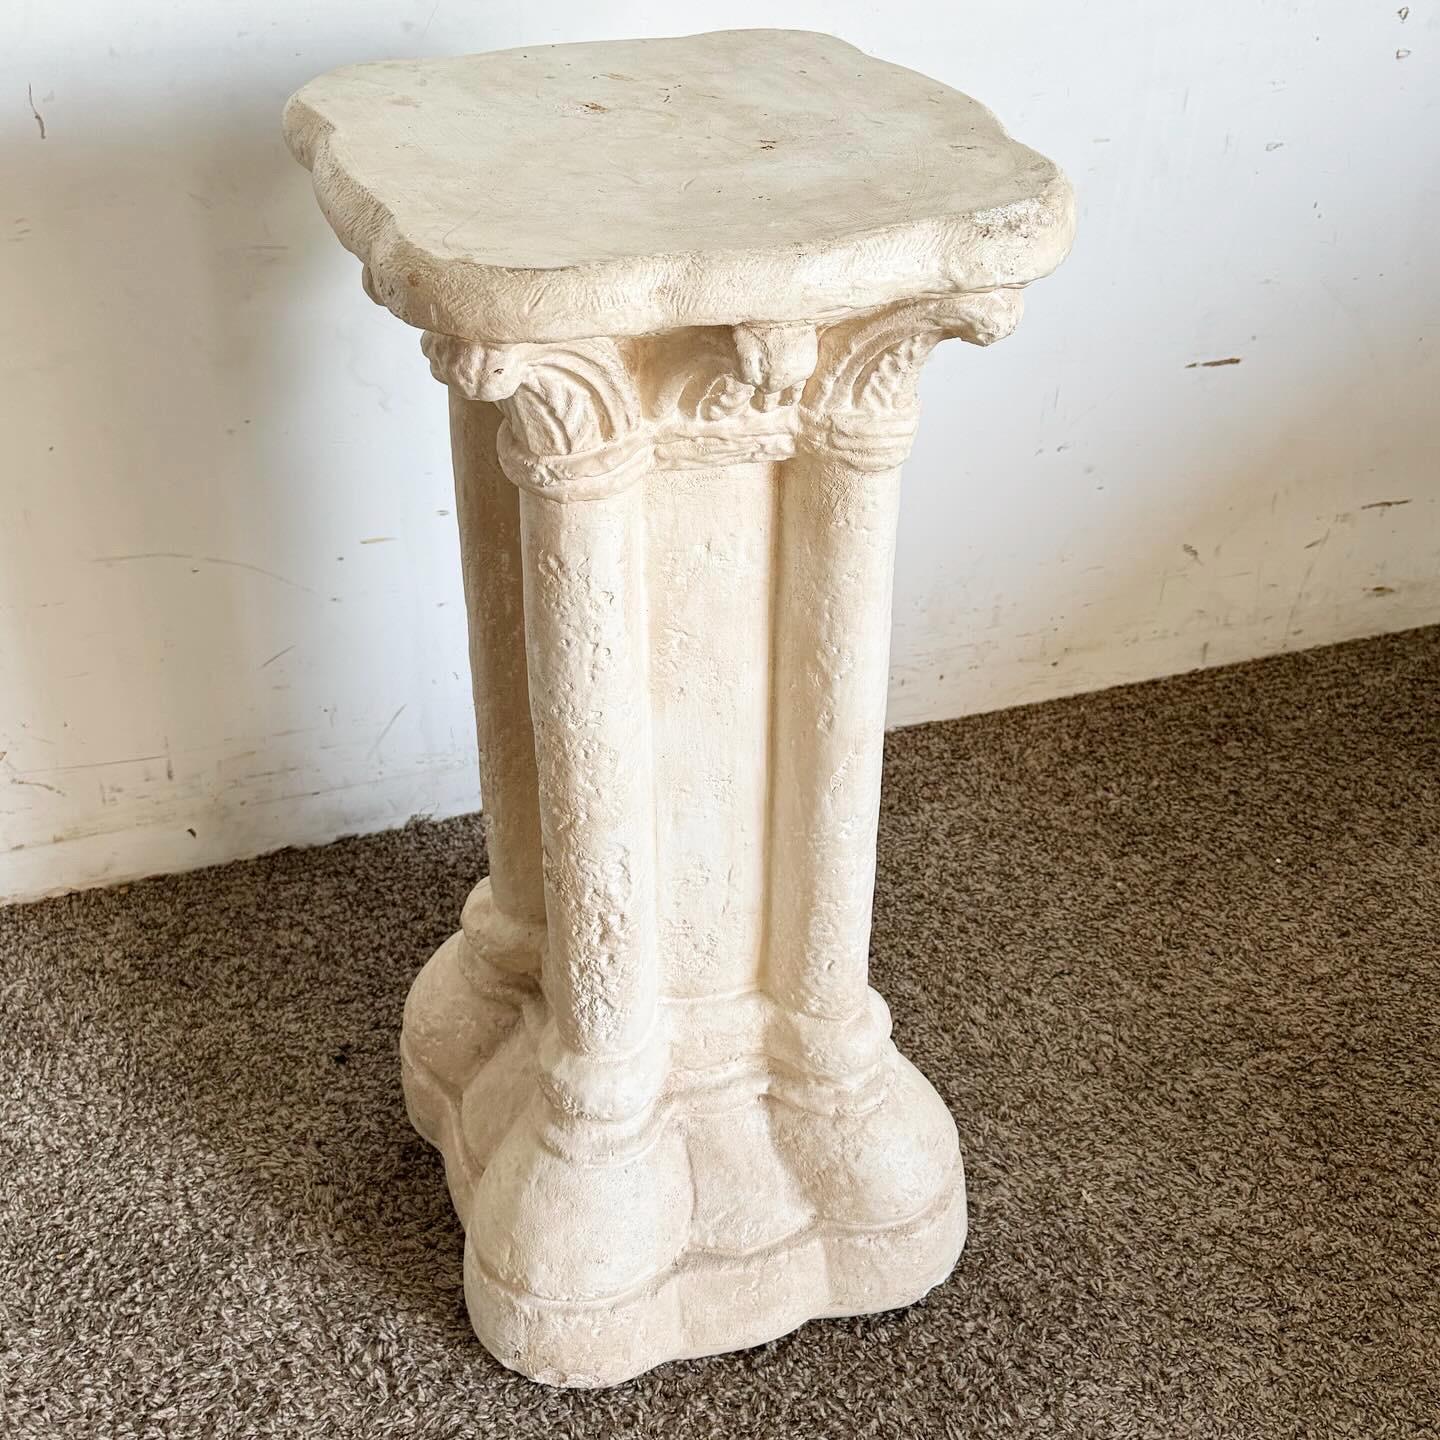 The Regency Plaster Cast Ceramic Pillar Pedestal is a perfect addition to any room seeking classic elegance. Crafted from high-quality plaster cast ceramic, it reflects the ornate Regency style. Ideal for displaying decorative items, its smooth